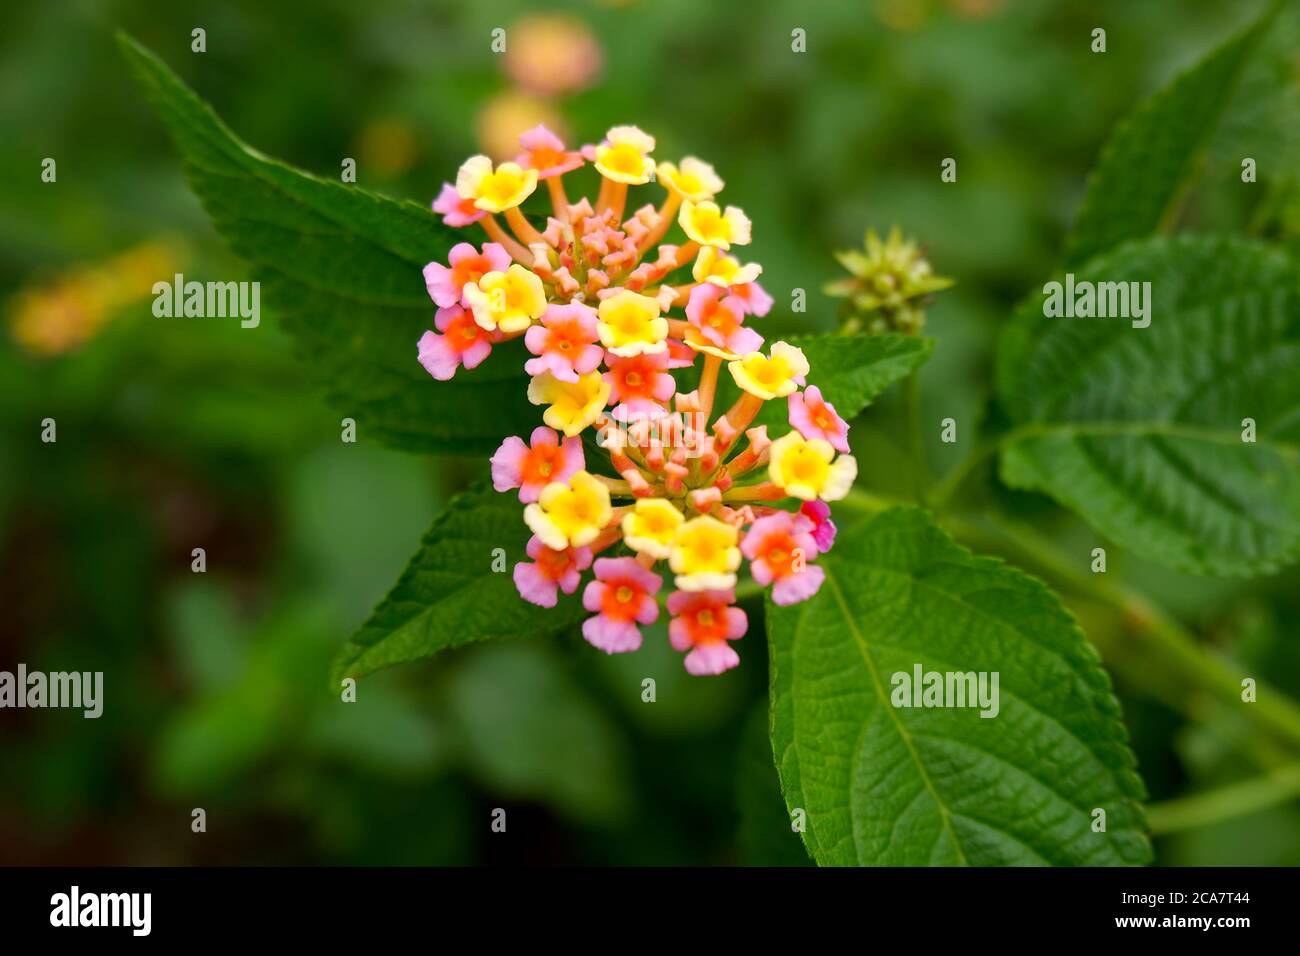 a closeup view of pink & yellow tiny flowers on plant in garden Stock Photo